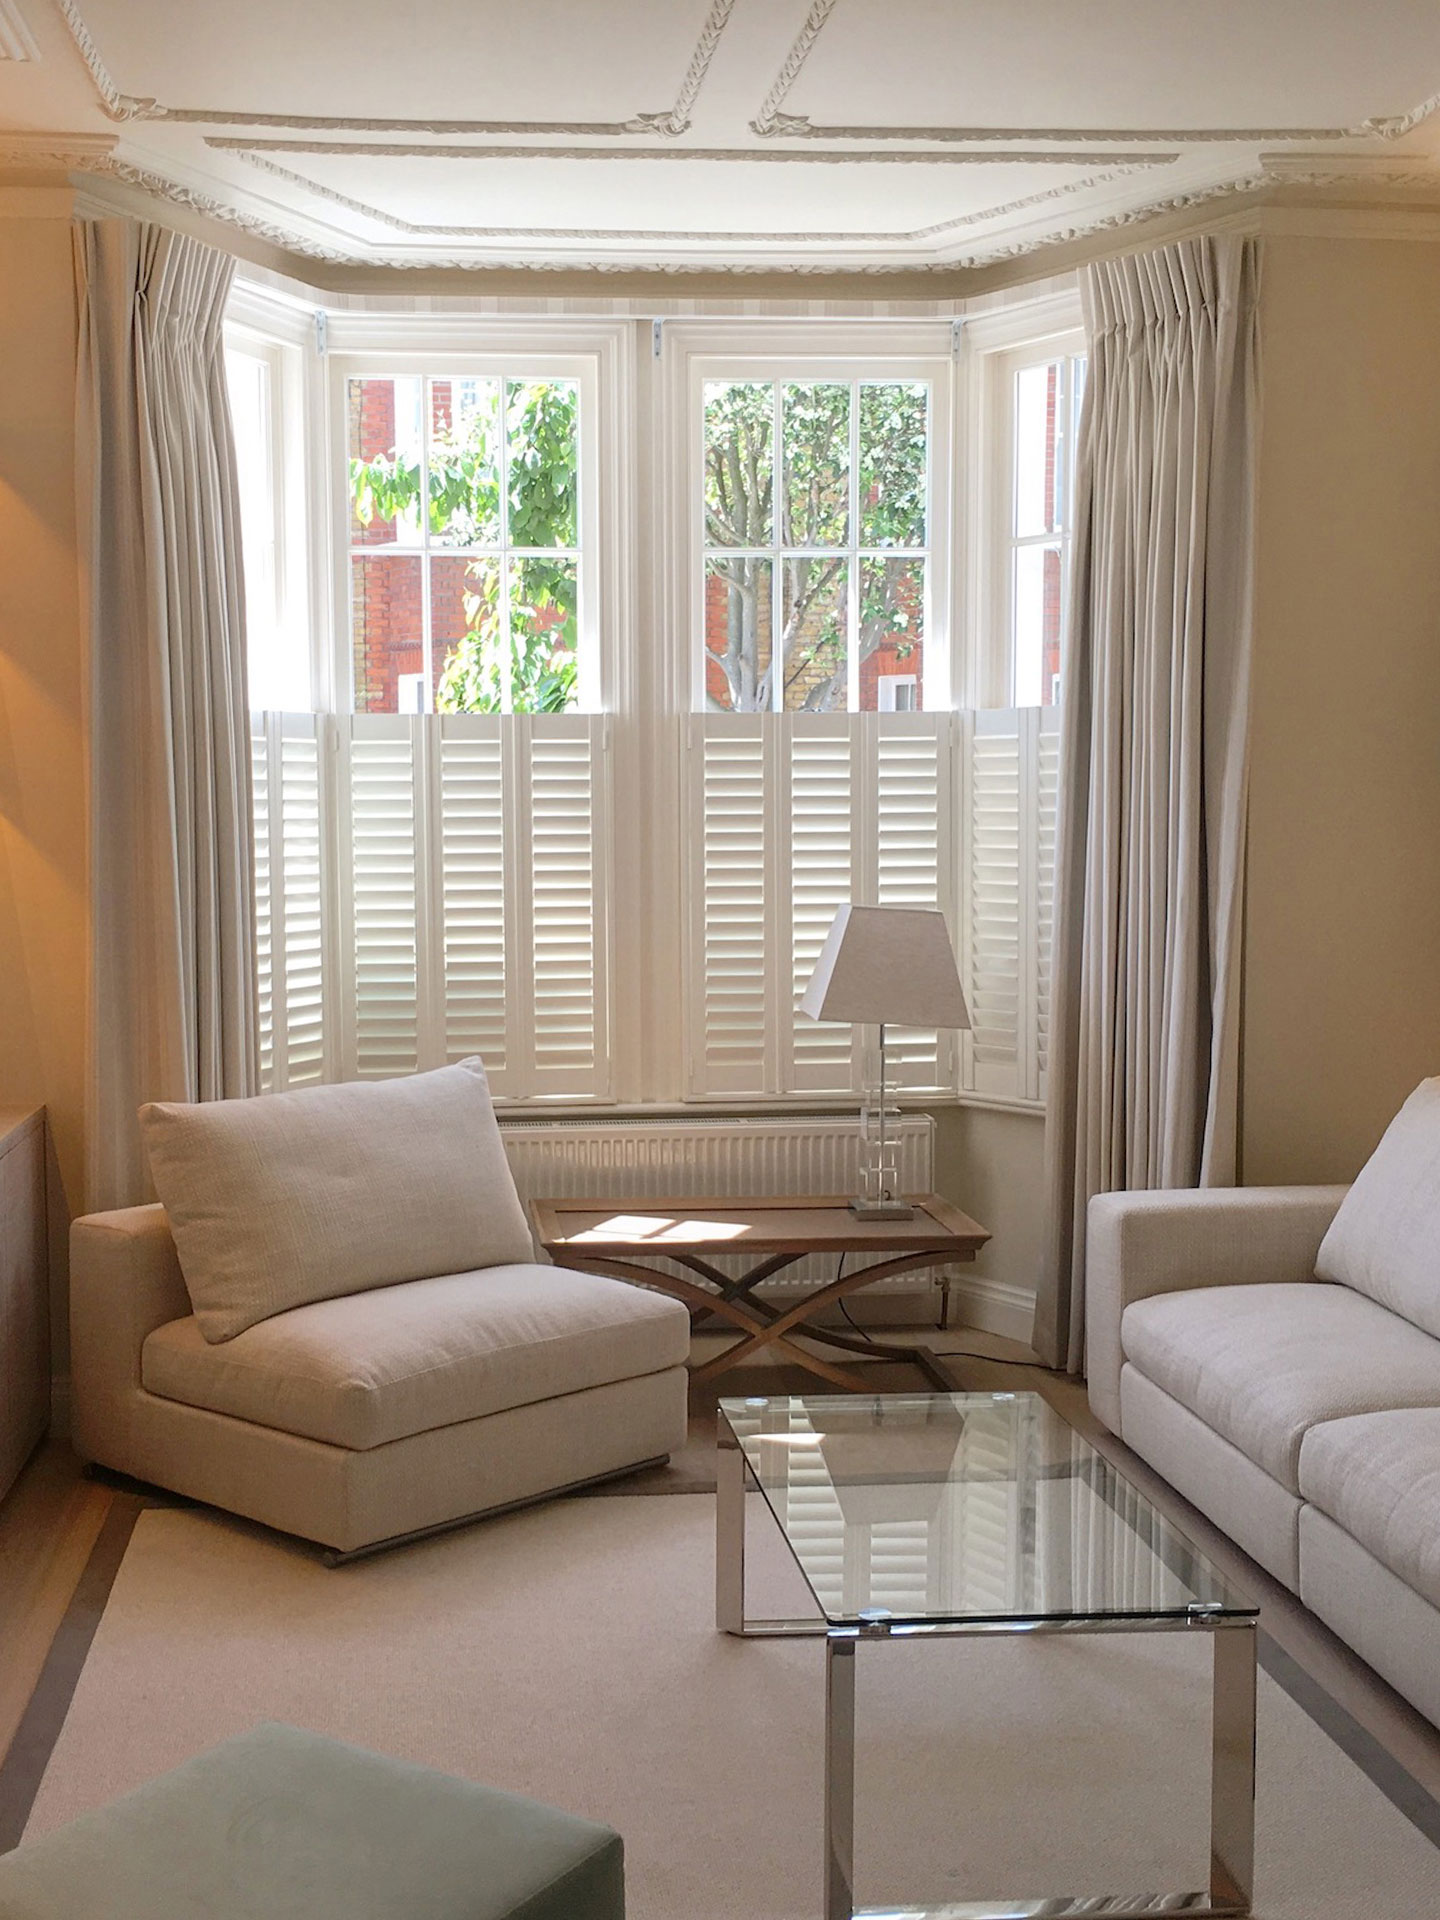 https://www.londonshades.co.uk/wp-content/uploads/2020/04/1-pinch-pleat-curtains-and-half-shutters.jpg